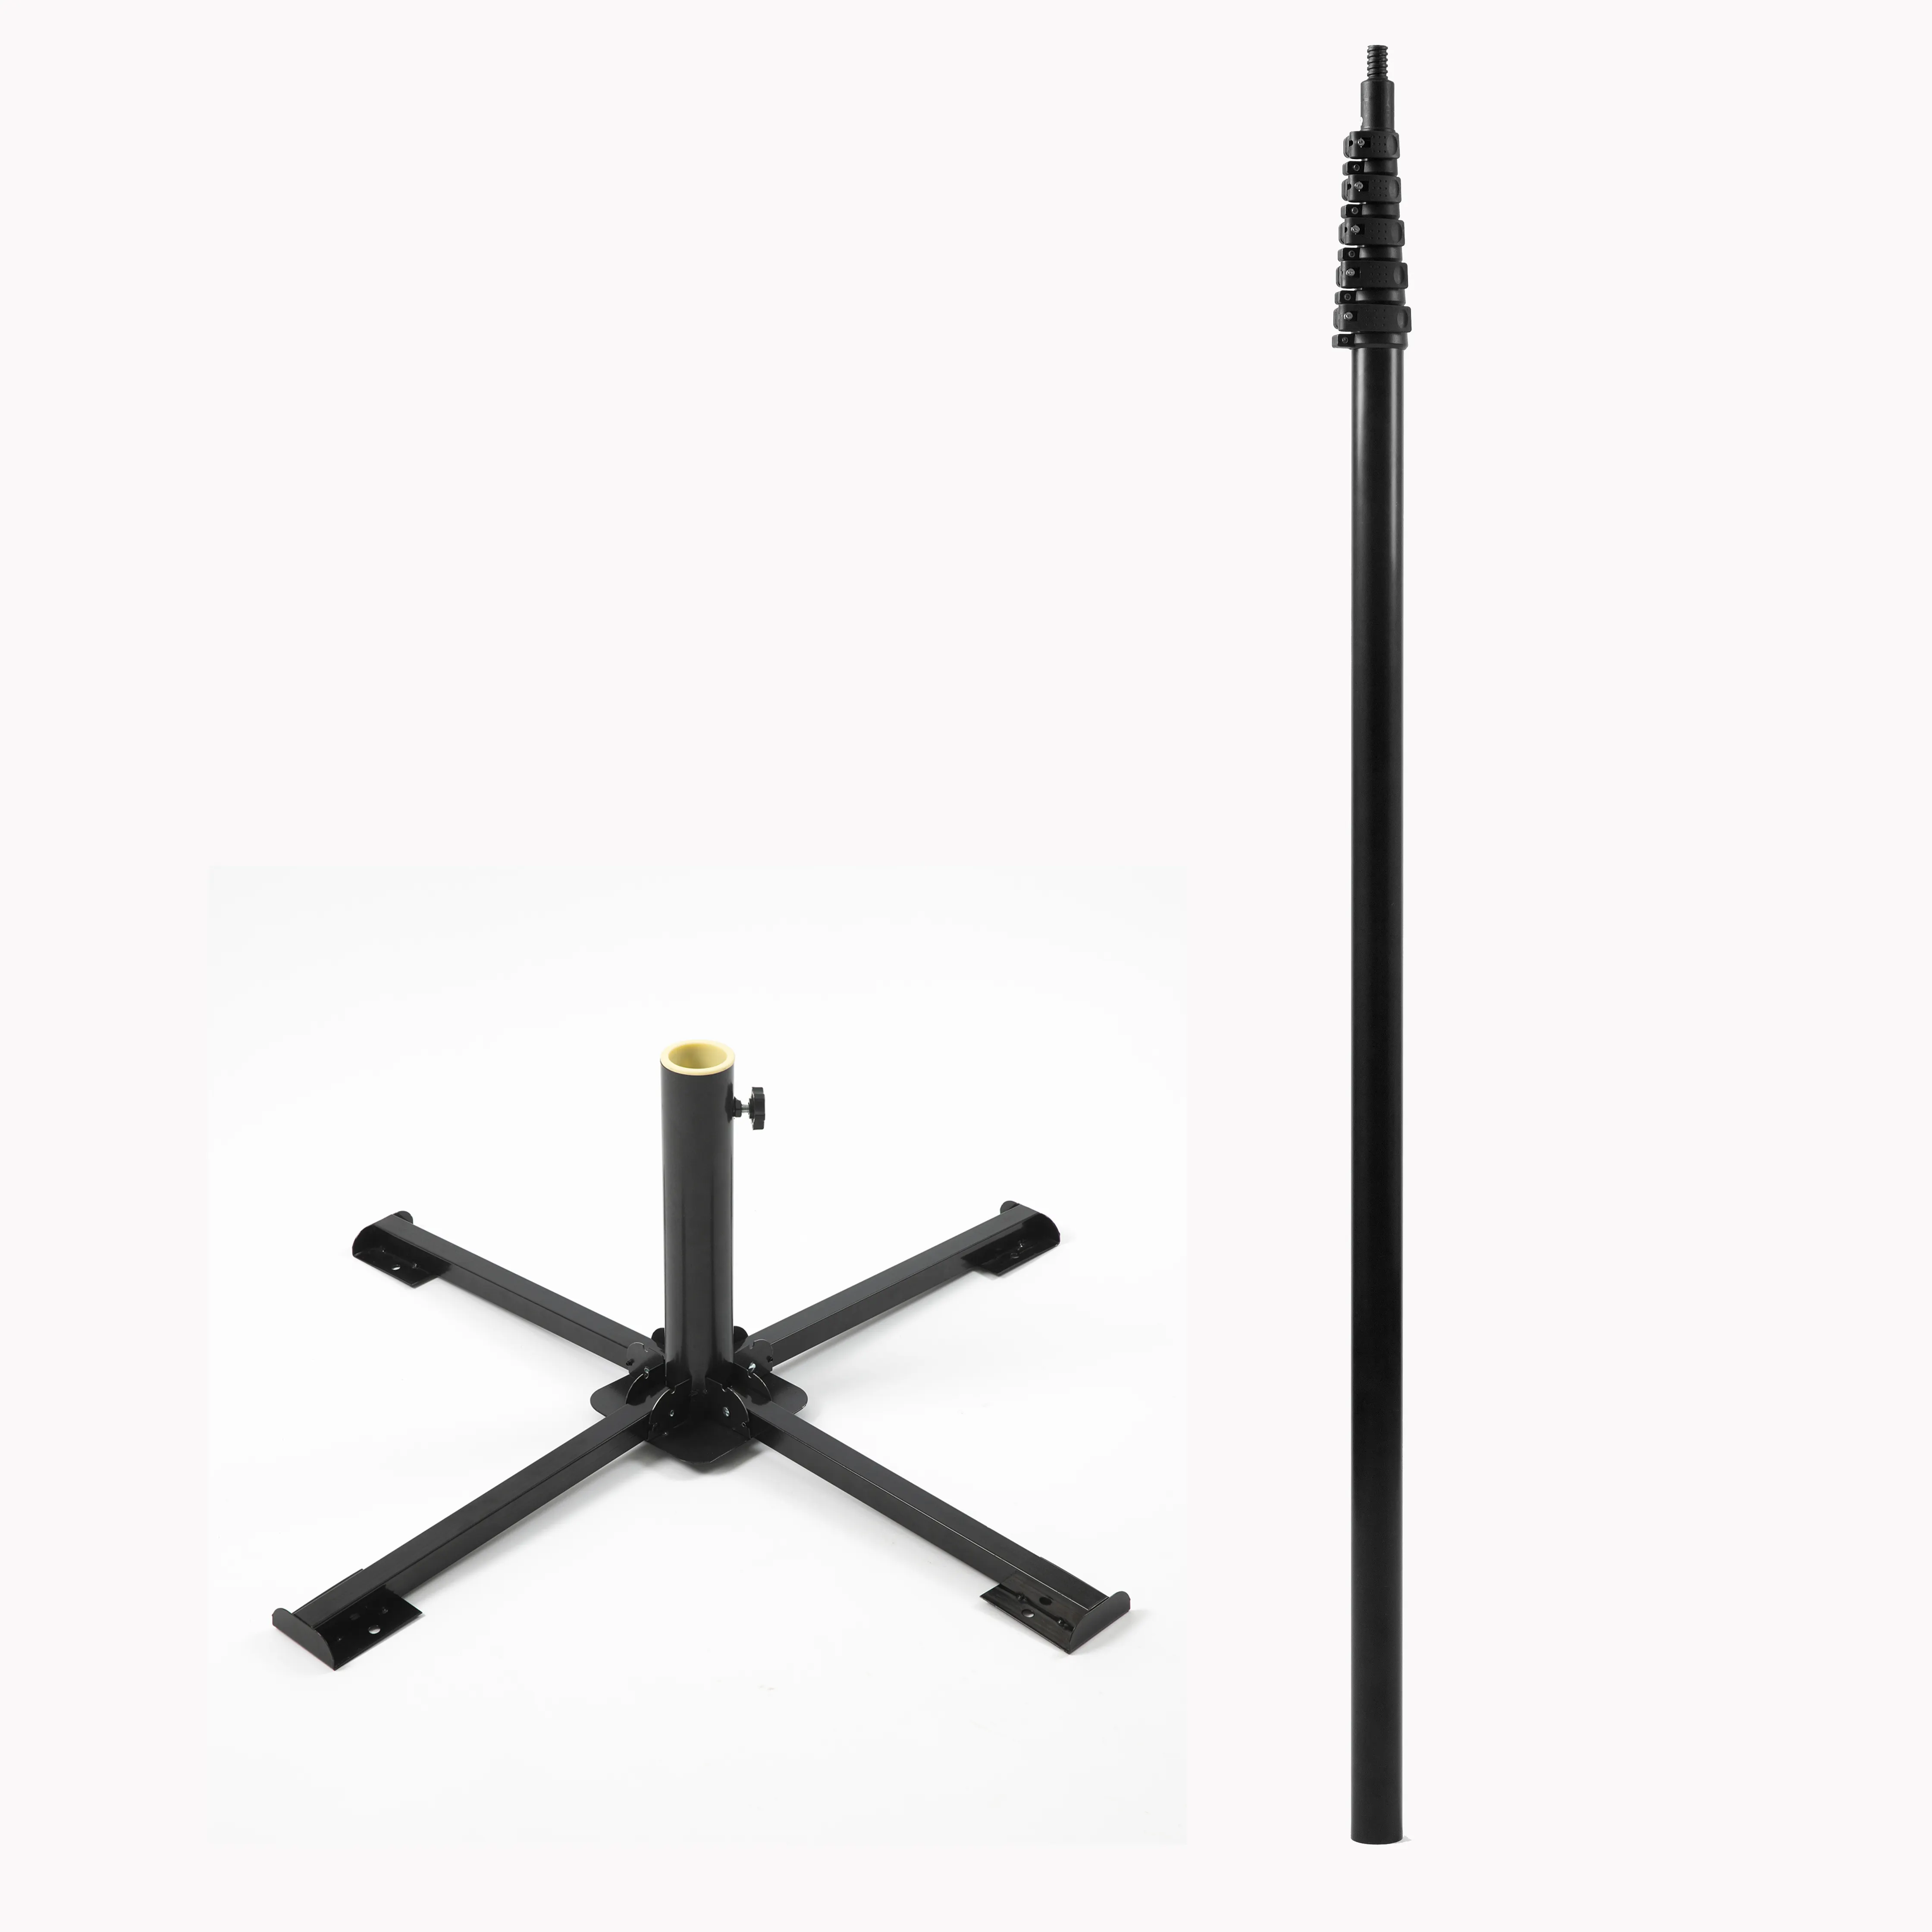 Multifunctional 7.6m Telescoping Antenna tripod Pole aluminum telescopic pole with base for supporting singal booster